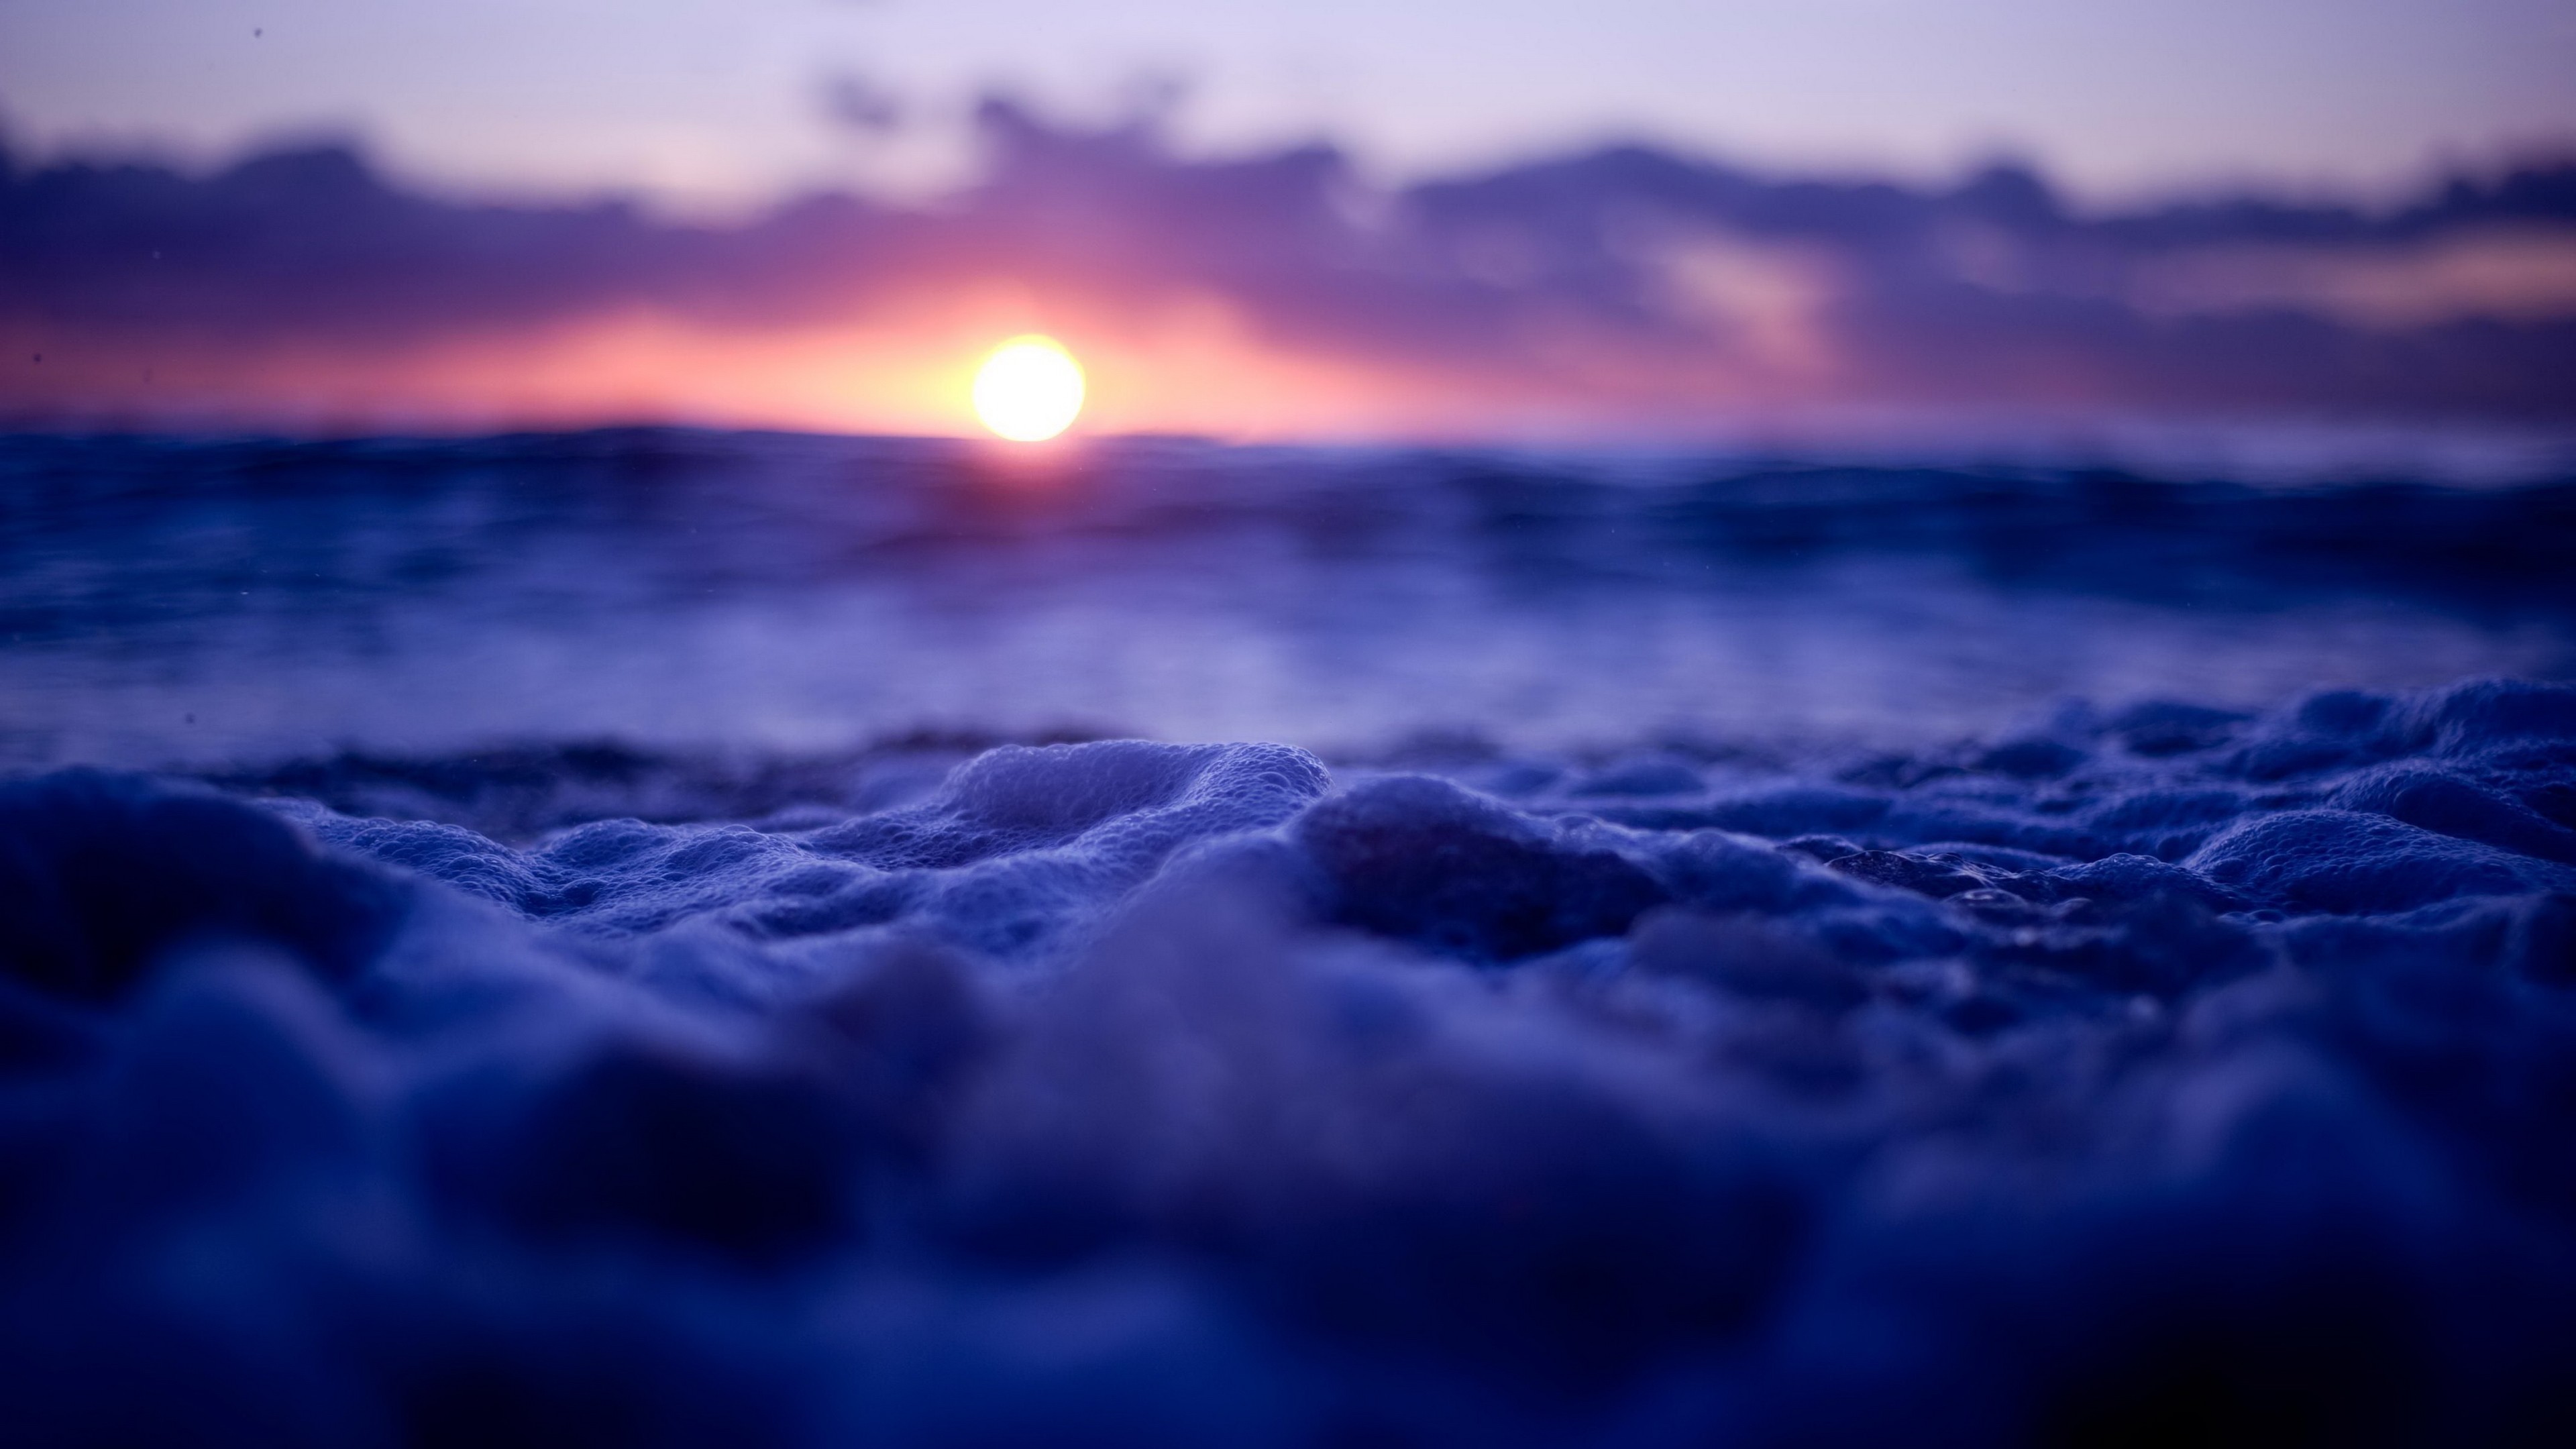 nature, Landscape, Water, Sunset, Bubbles, Sea, Clouds, Depth of field, Waves Wallpaper